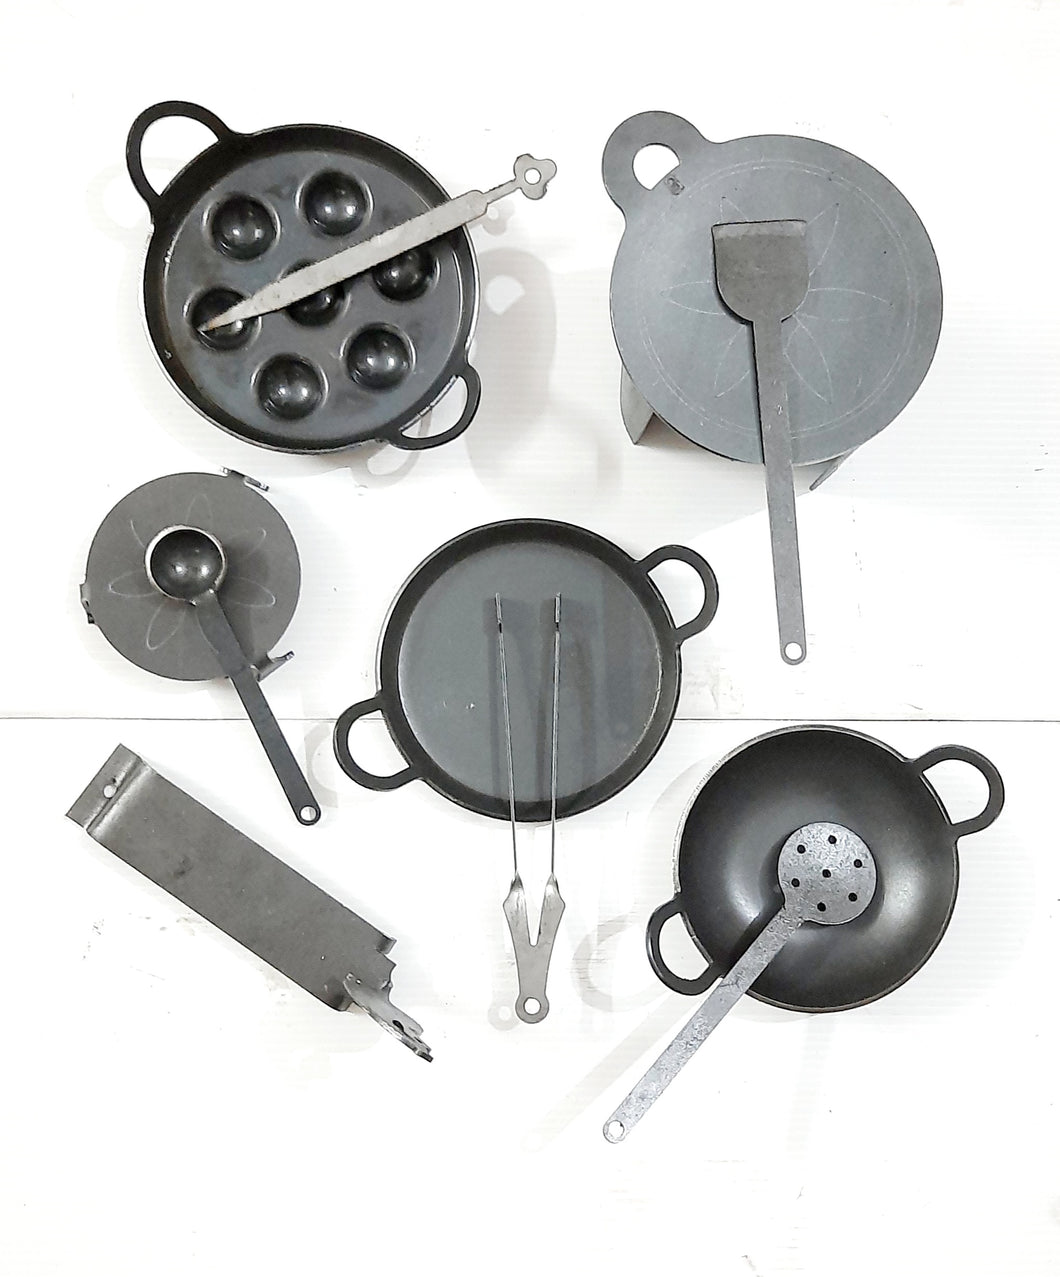 Iron cooking set (Set of 11 pieces) - For MINIATURE COOKING )